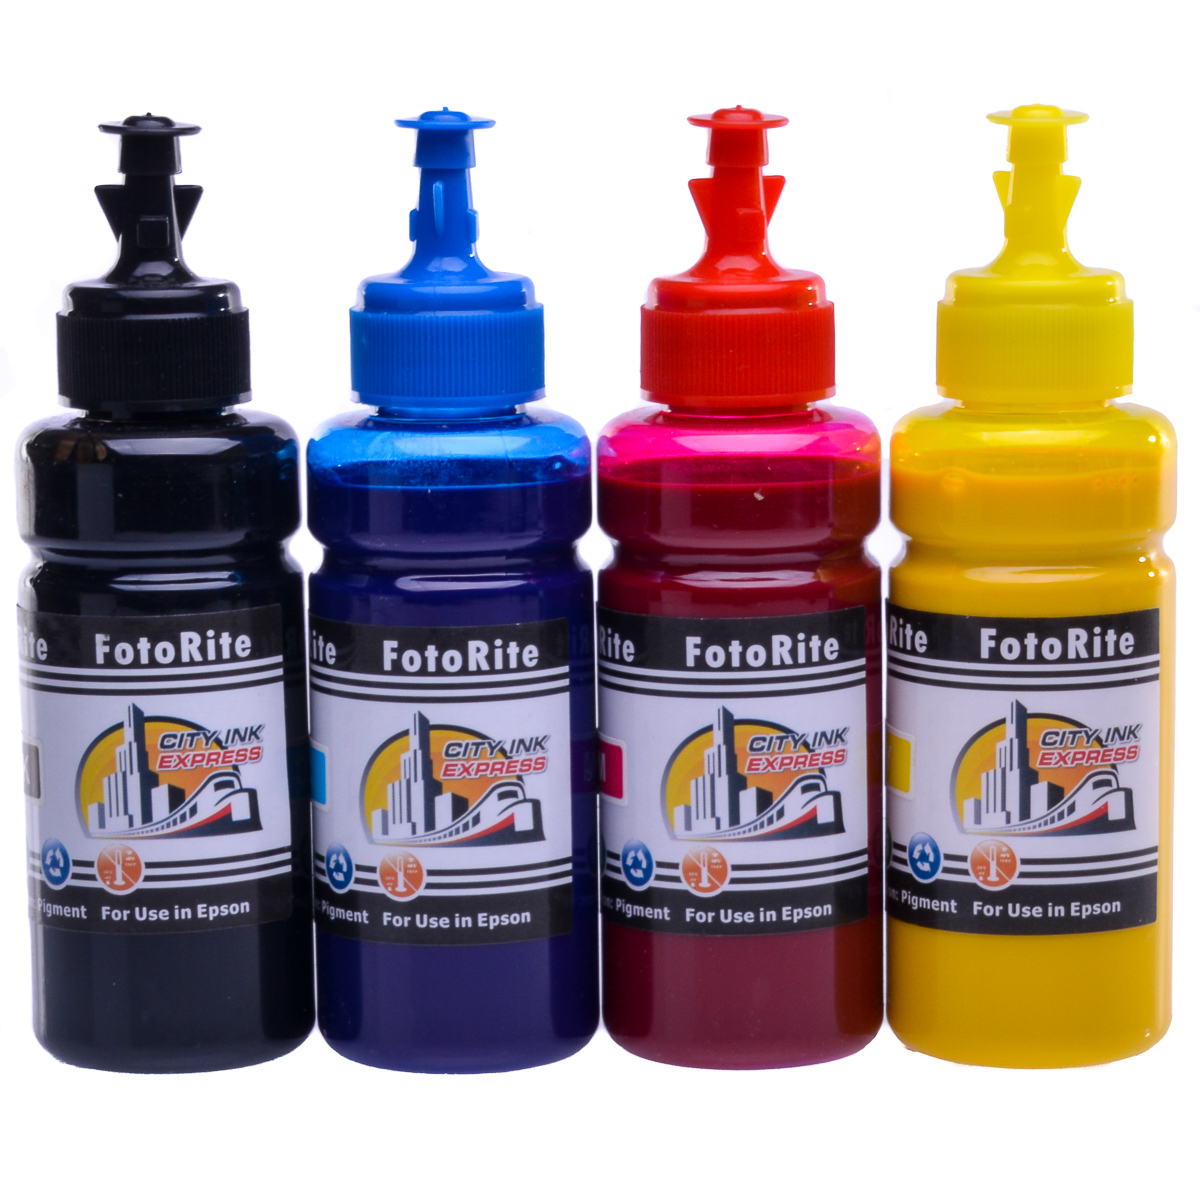 Cheap Multipack pigment ink refill replaces Epson L6550